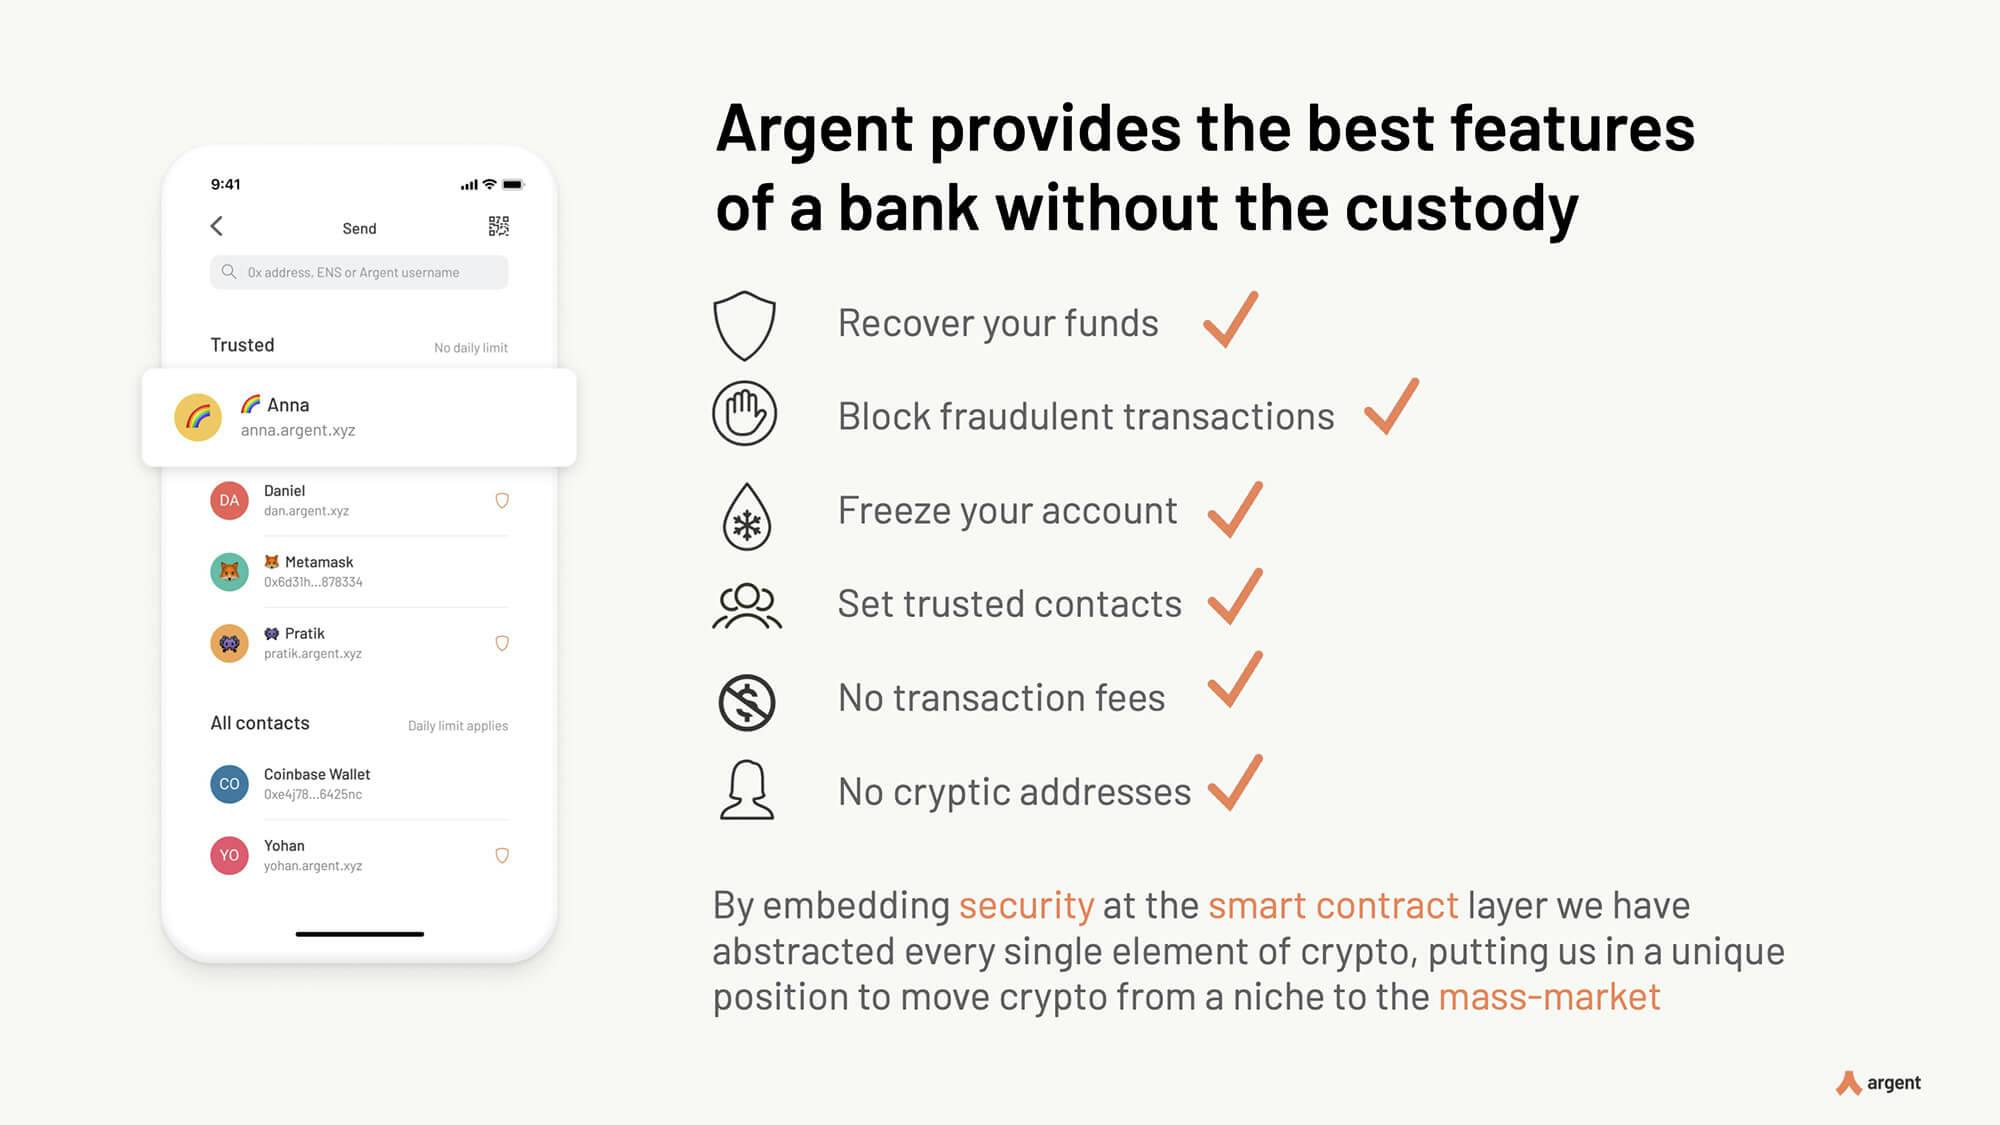 Argent provides the best features of a bank without the custody